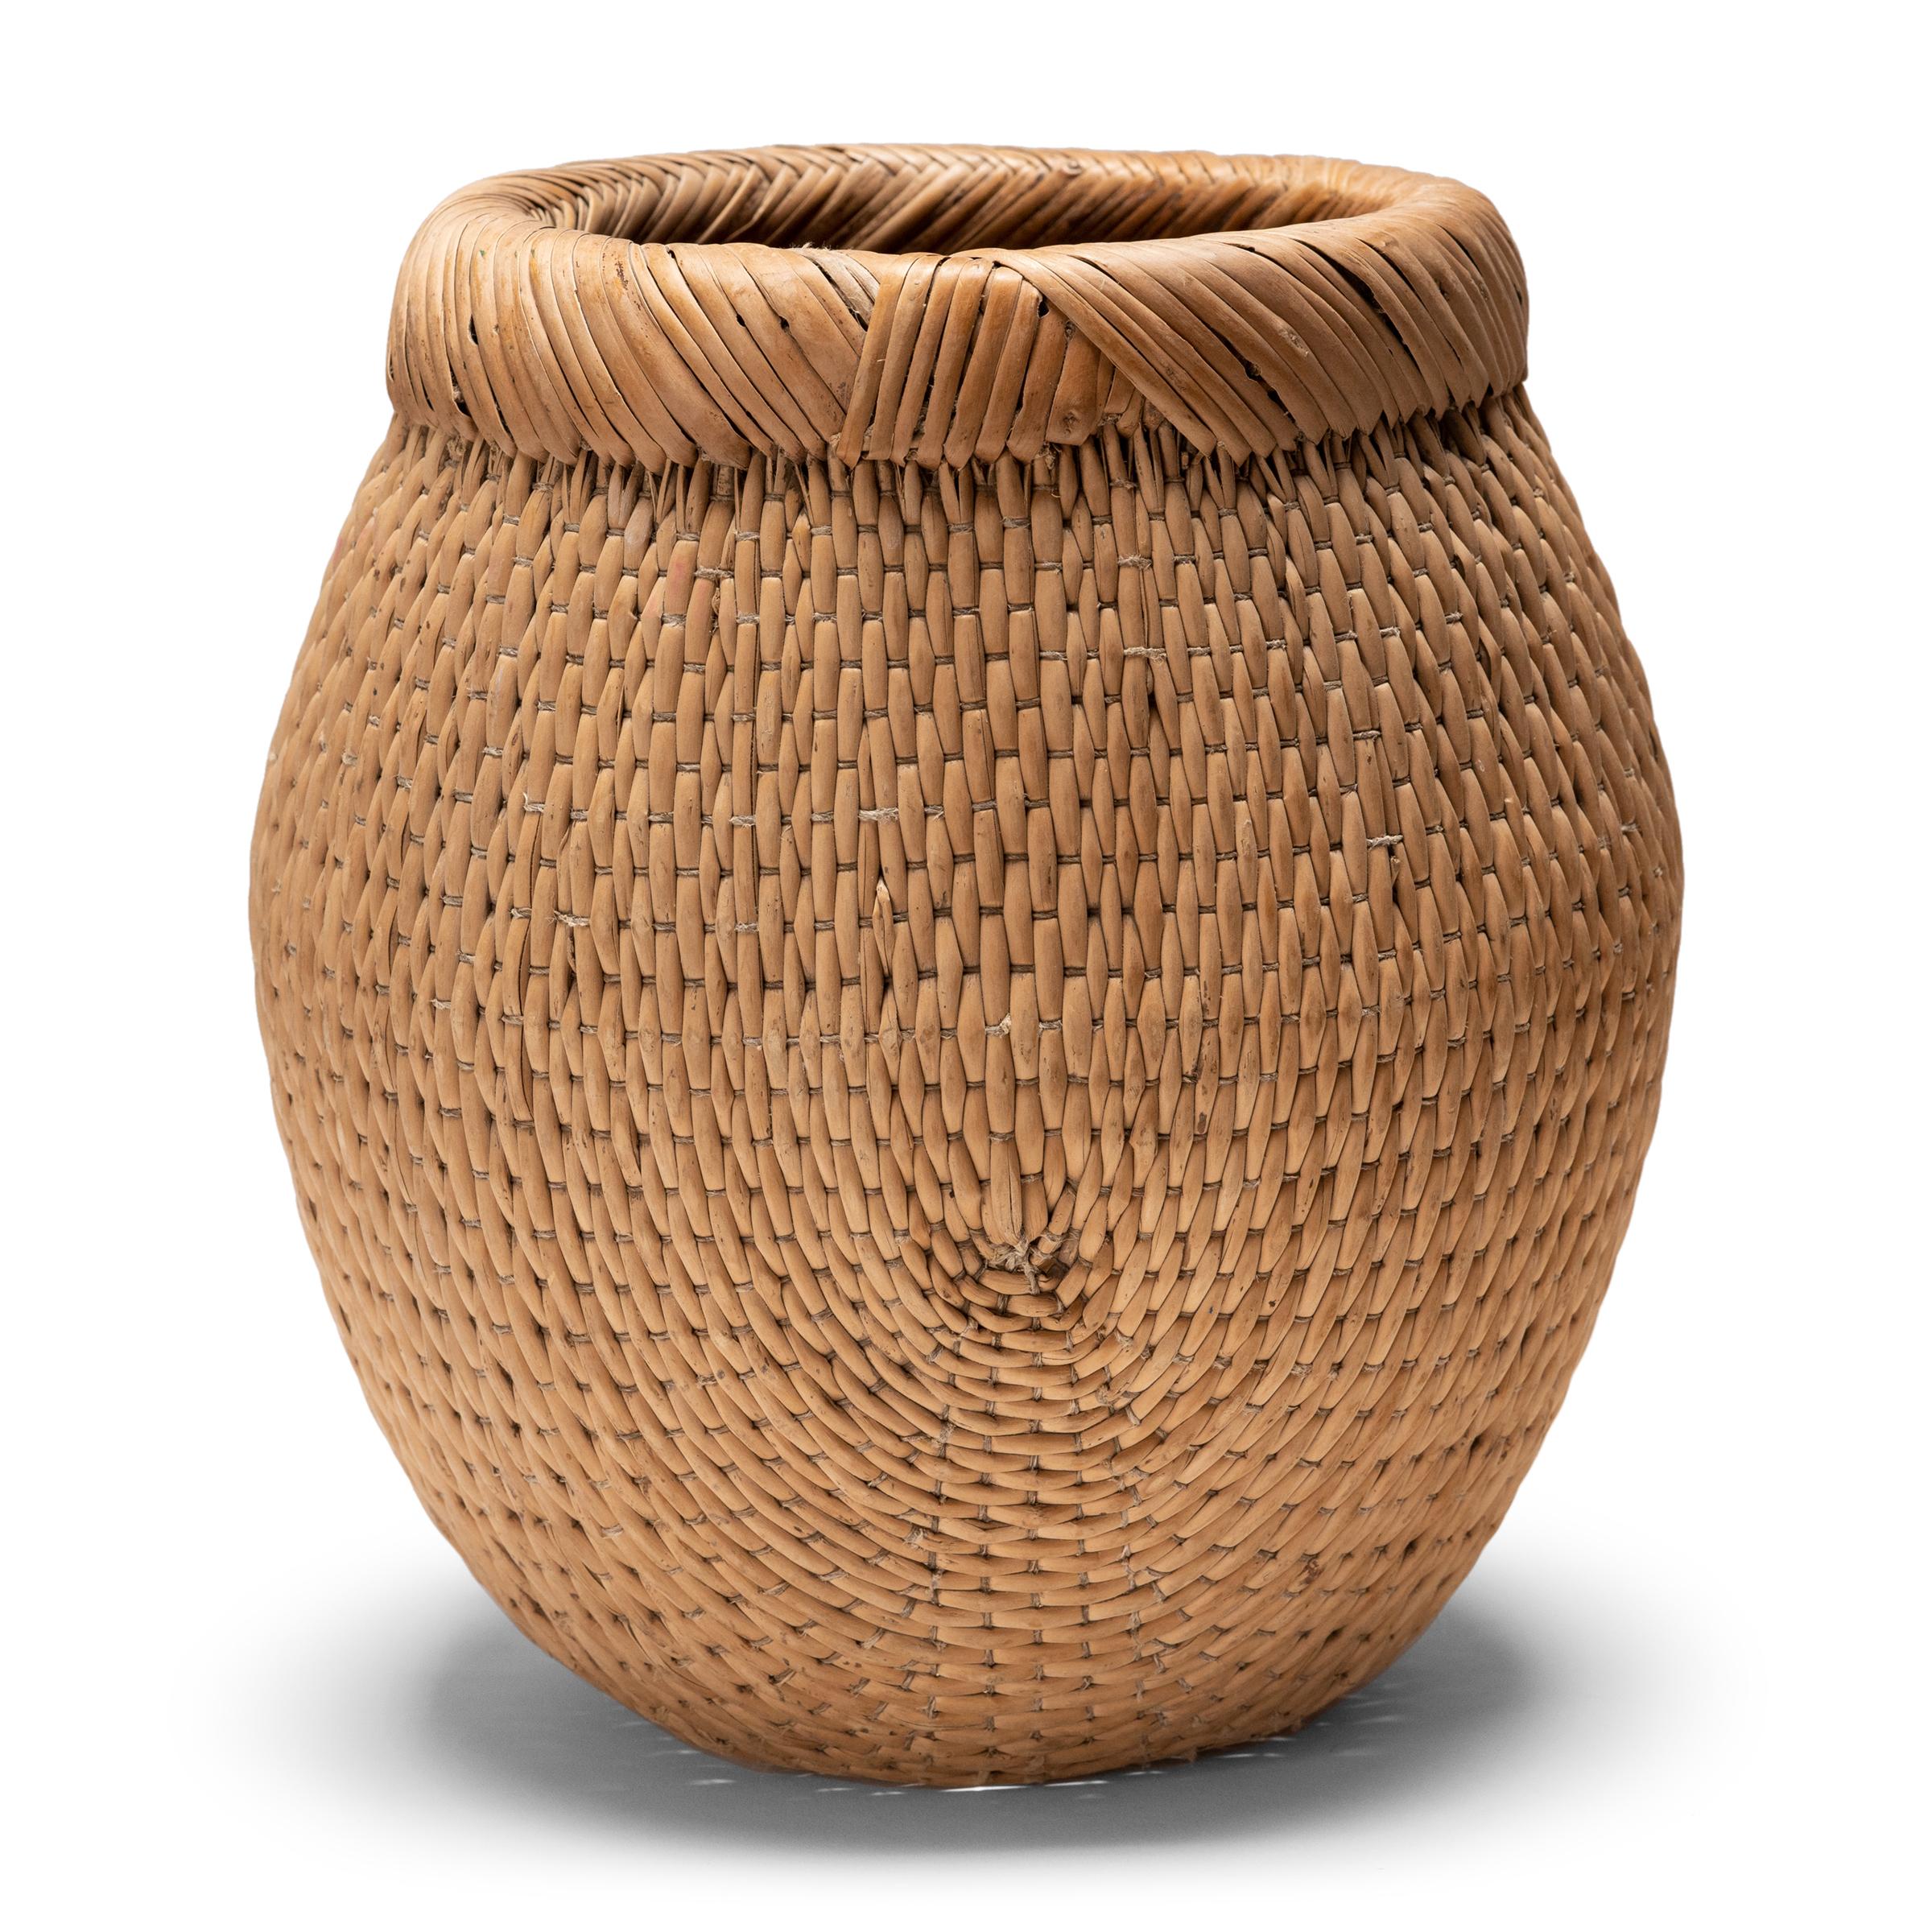 Basket making is an ancient and humble craft, but in the hands of a skilled weaver a simple willow basket can become a truly beautiful work of art. This basket was made in China long ago, and the artisan’s mastery is evident, having been passed down